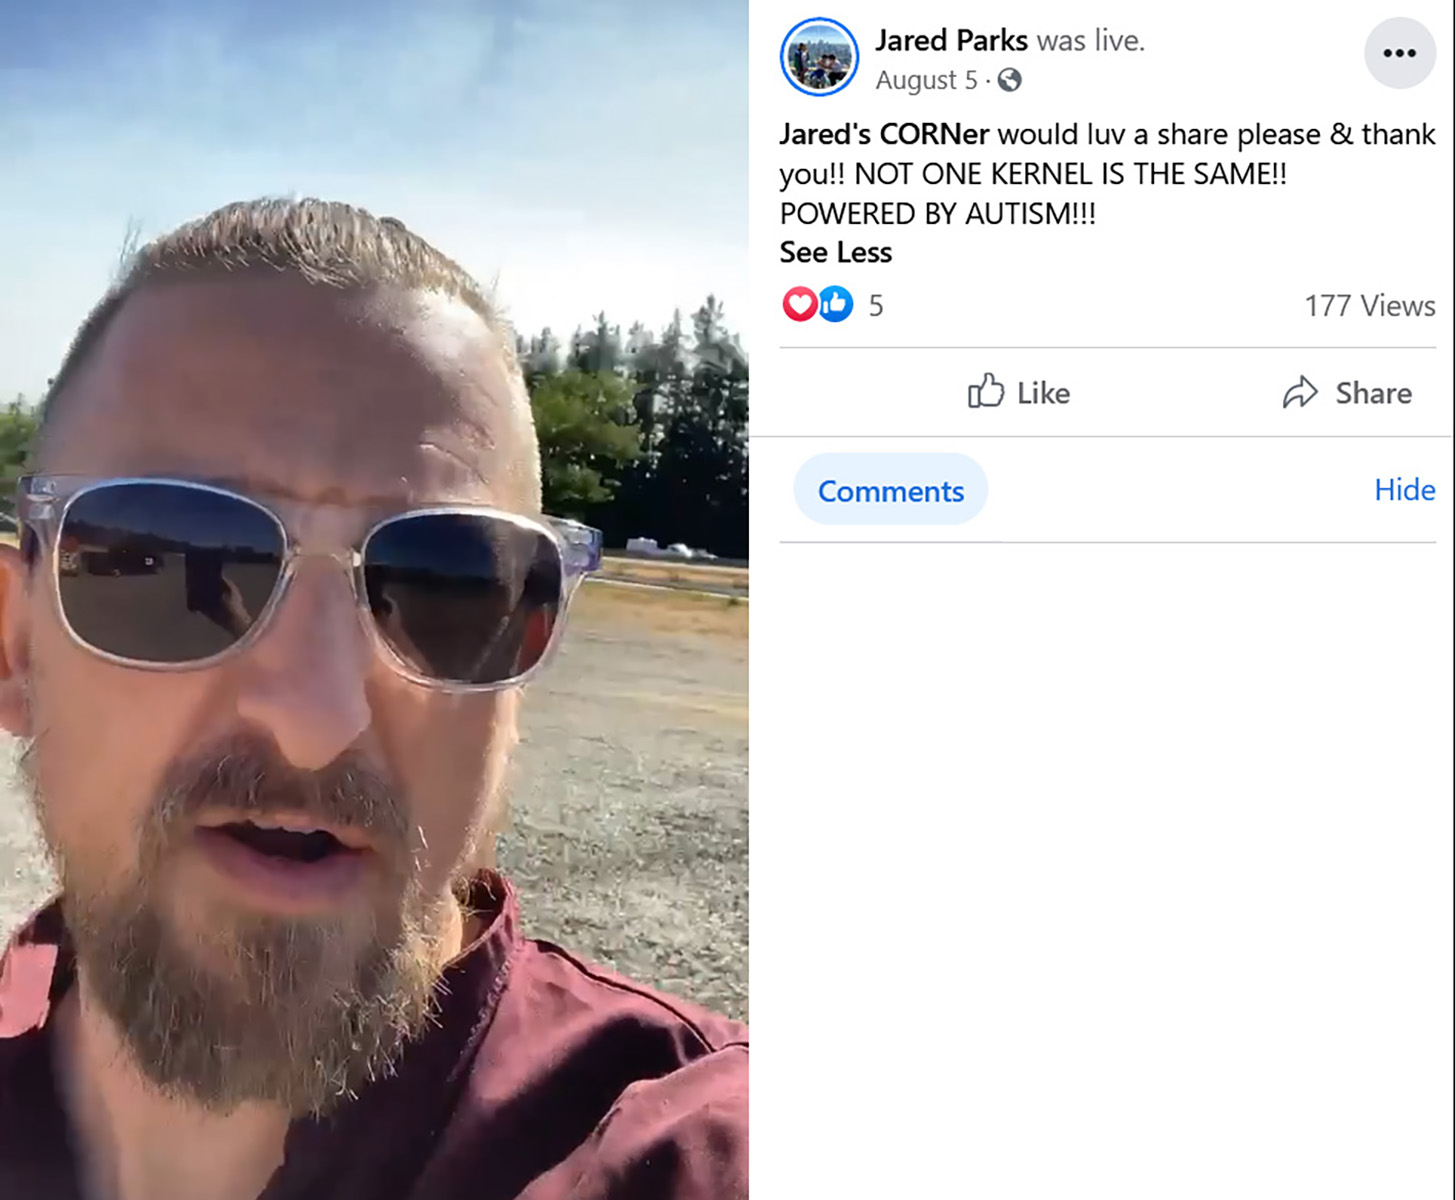 Screen shot of a basic bearded white man next to his Facebook post stating that his popcorn business is powered by autism.